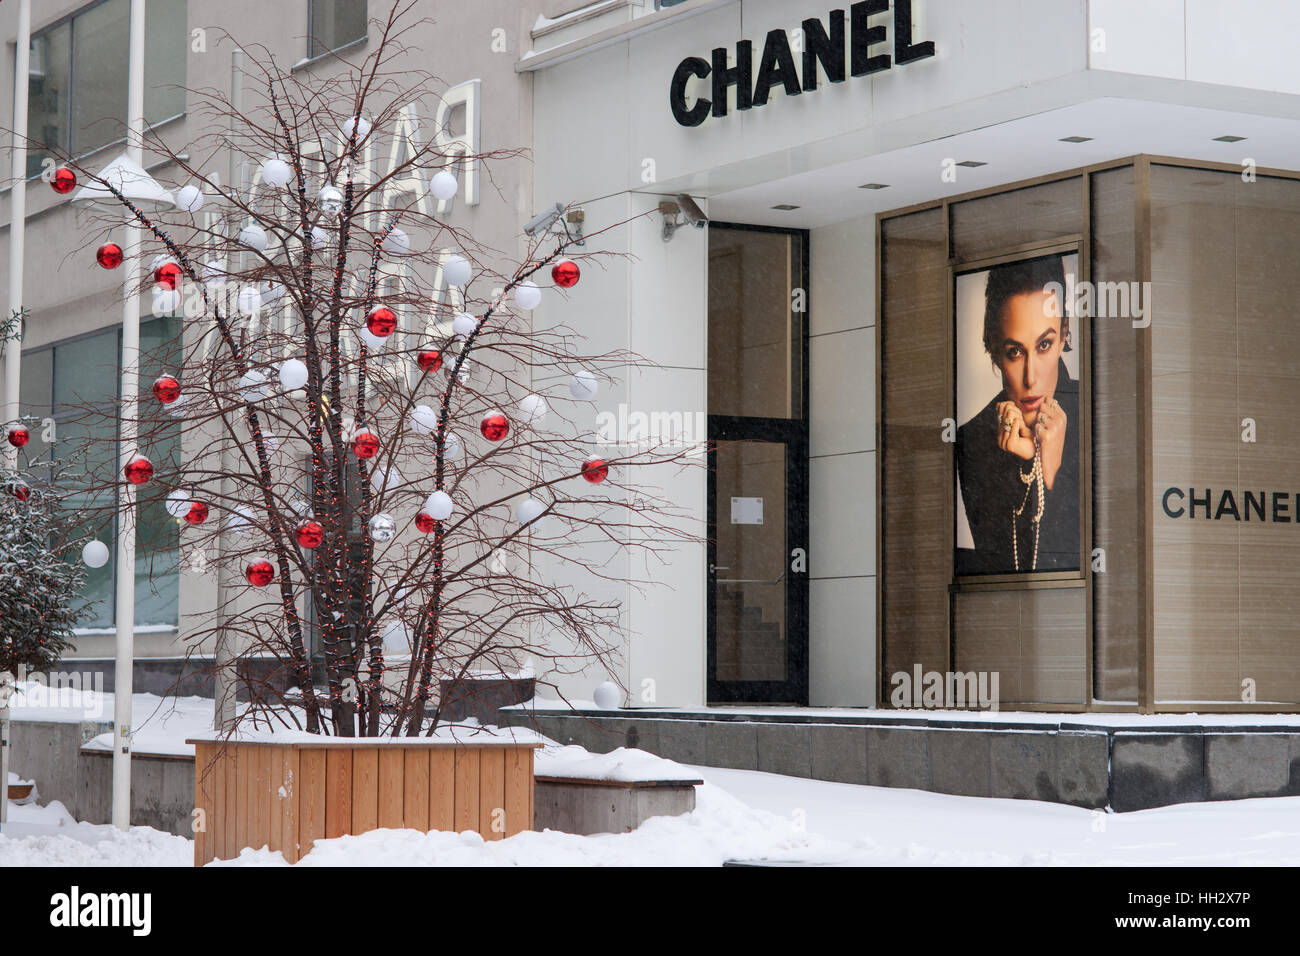 Moscow, Russia. Sunday, January 15, 2017. Christmas and New Year decorated  Chanel shop on Petrovka street. Wet, windy and snowy Sunday in Moscow. The  temperature is about -2C (28F). Heavy clouds, snow